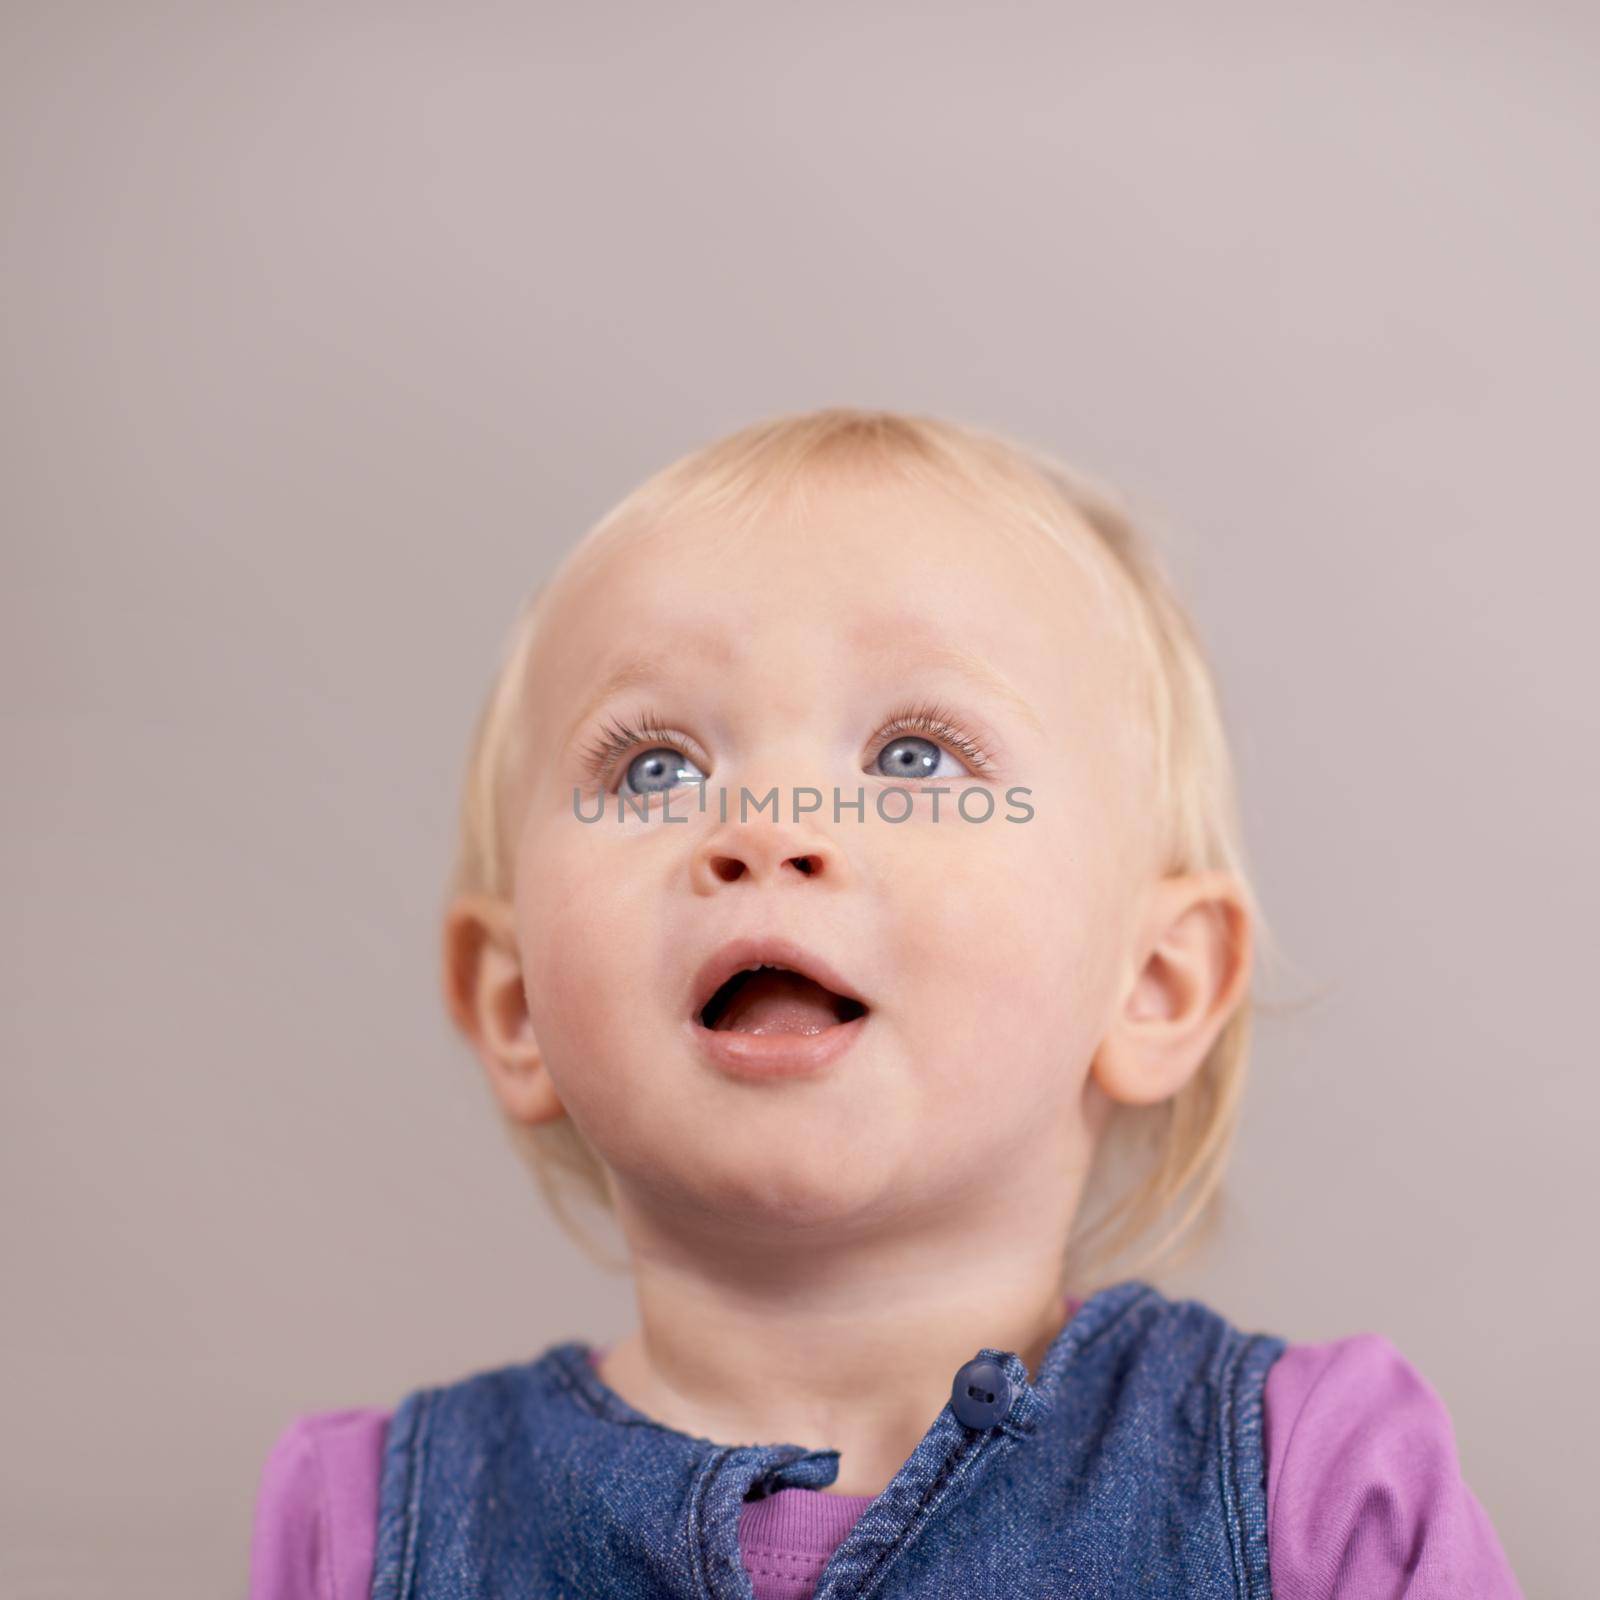 Hes such an adorable little boy. Studio shot of a baby girl looking upwards